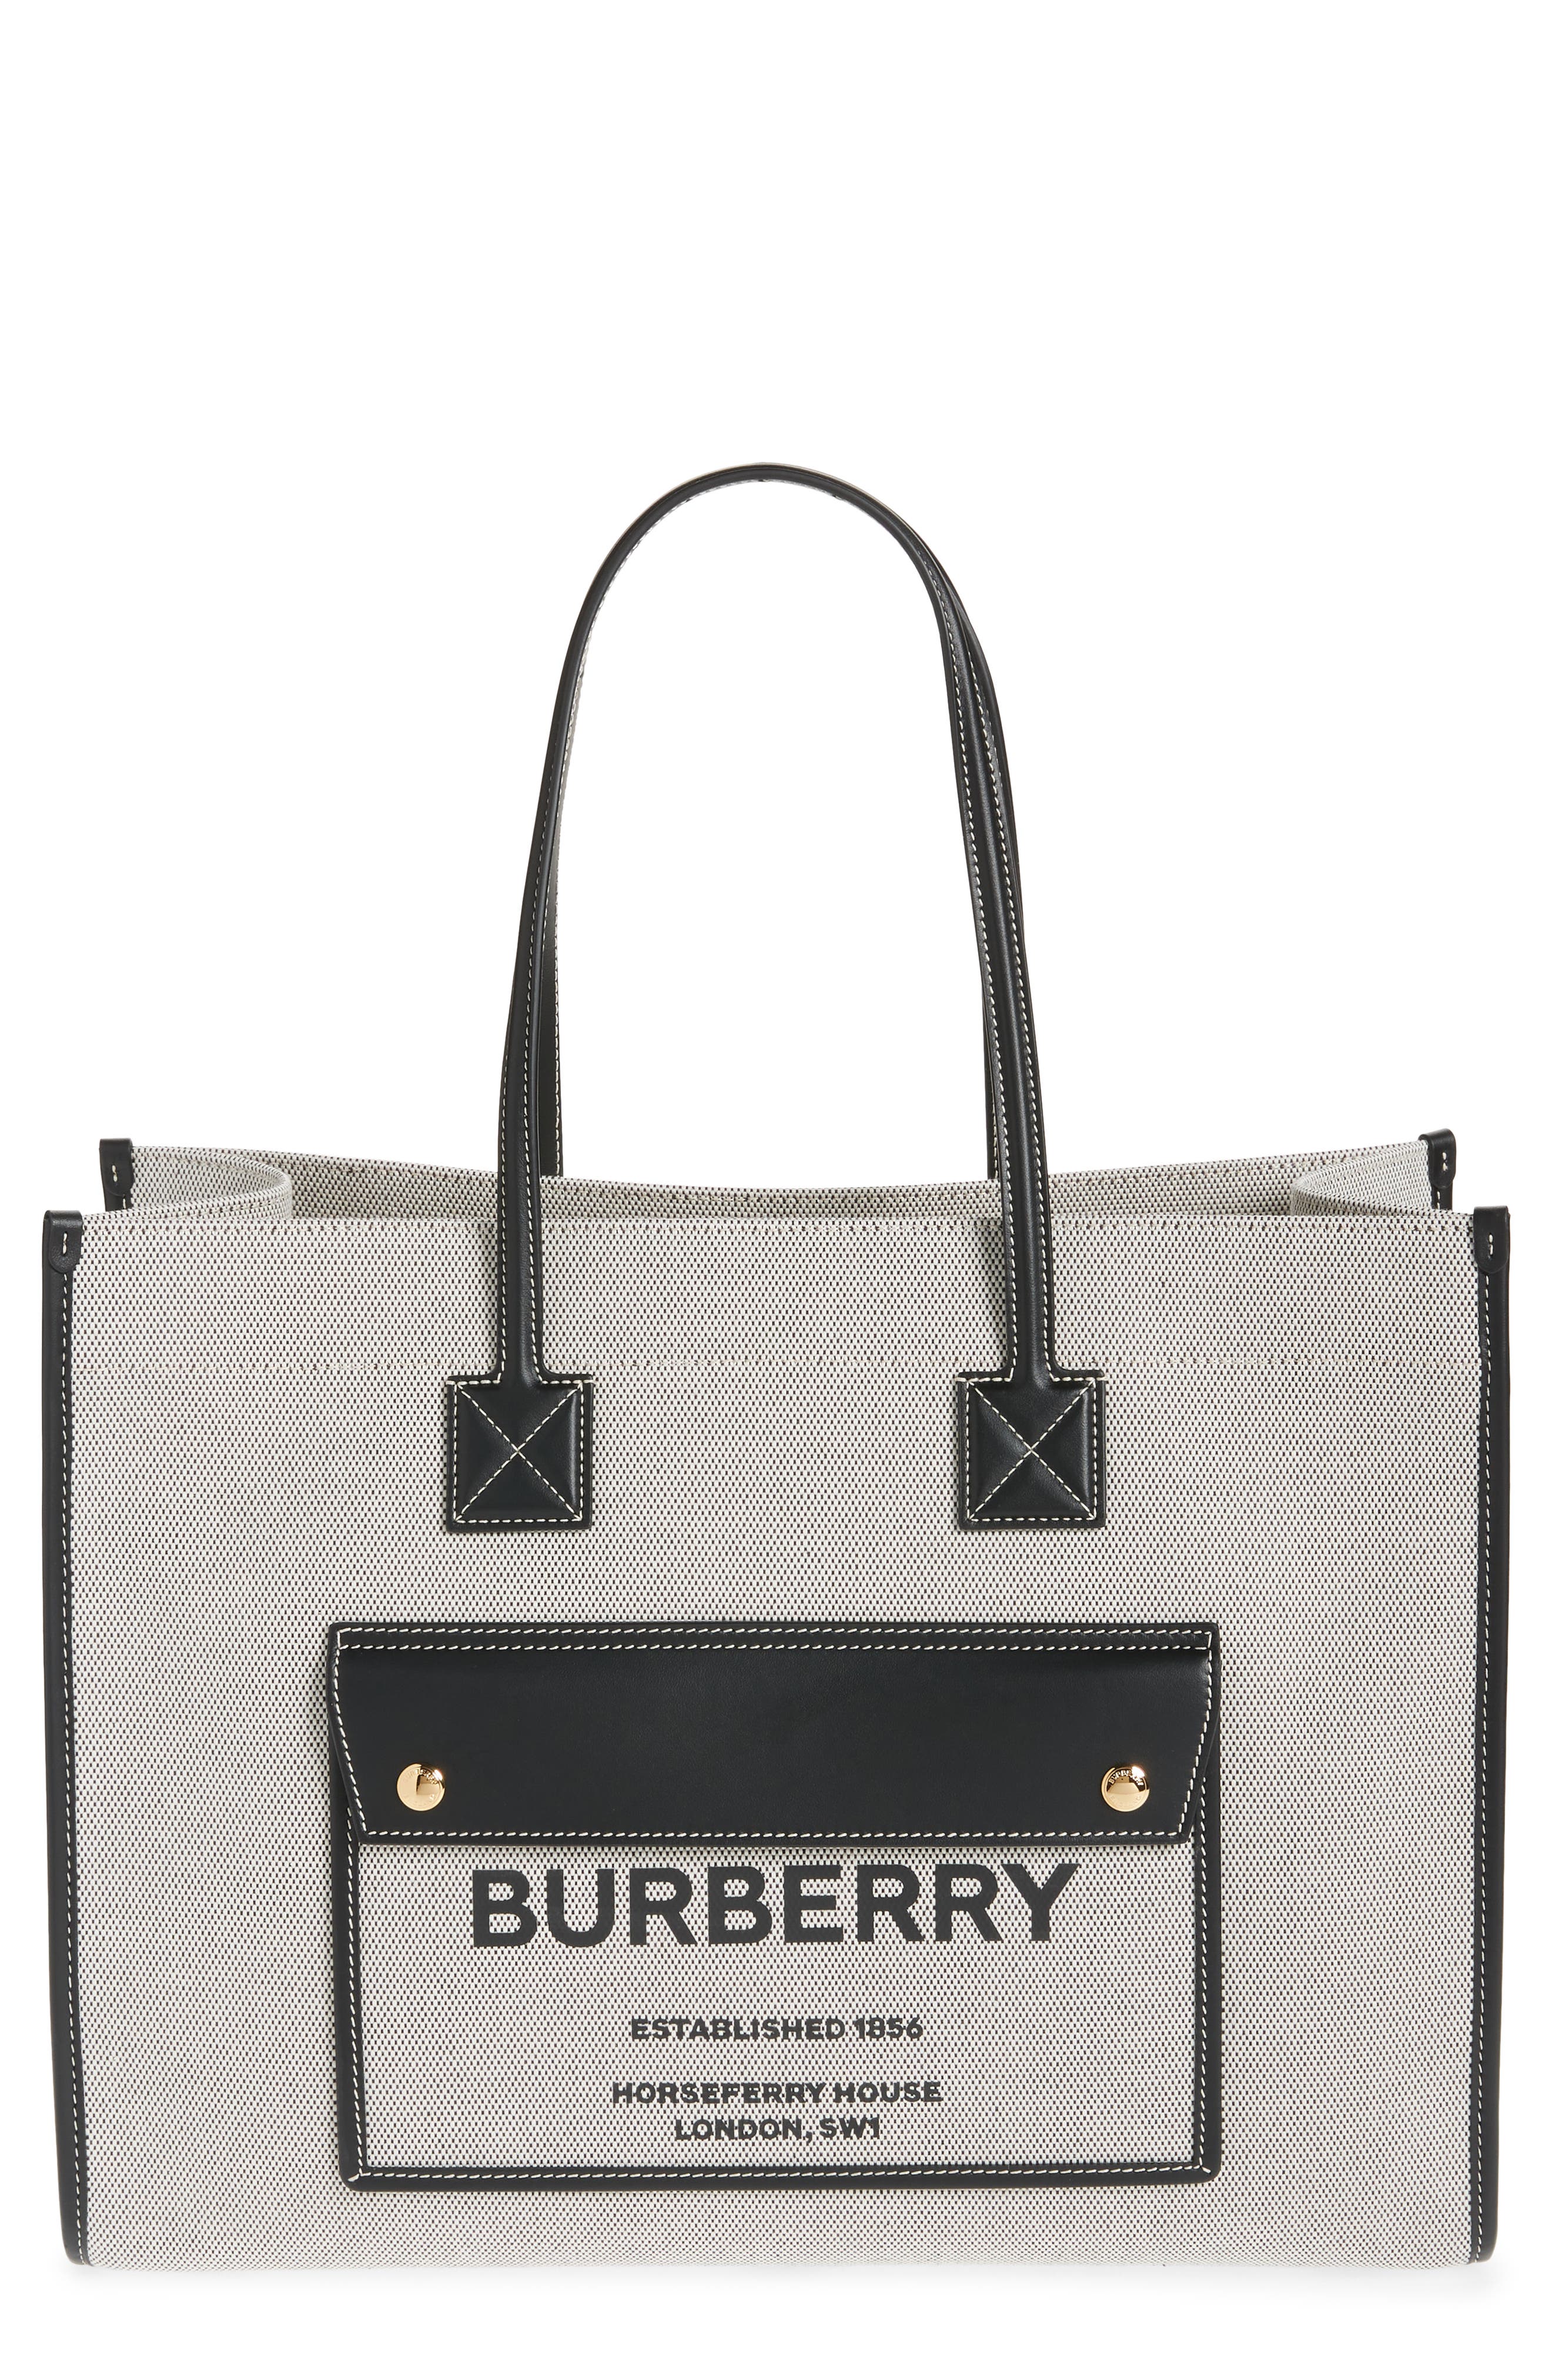 Burberry Medium Freya Horseferry Logo Canvas & Leather Tote in Black/Black at Nordstrom